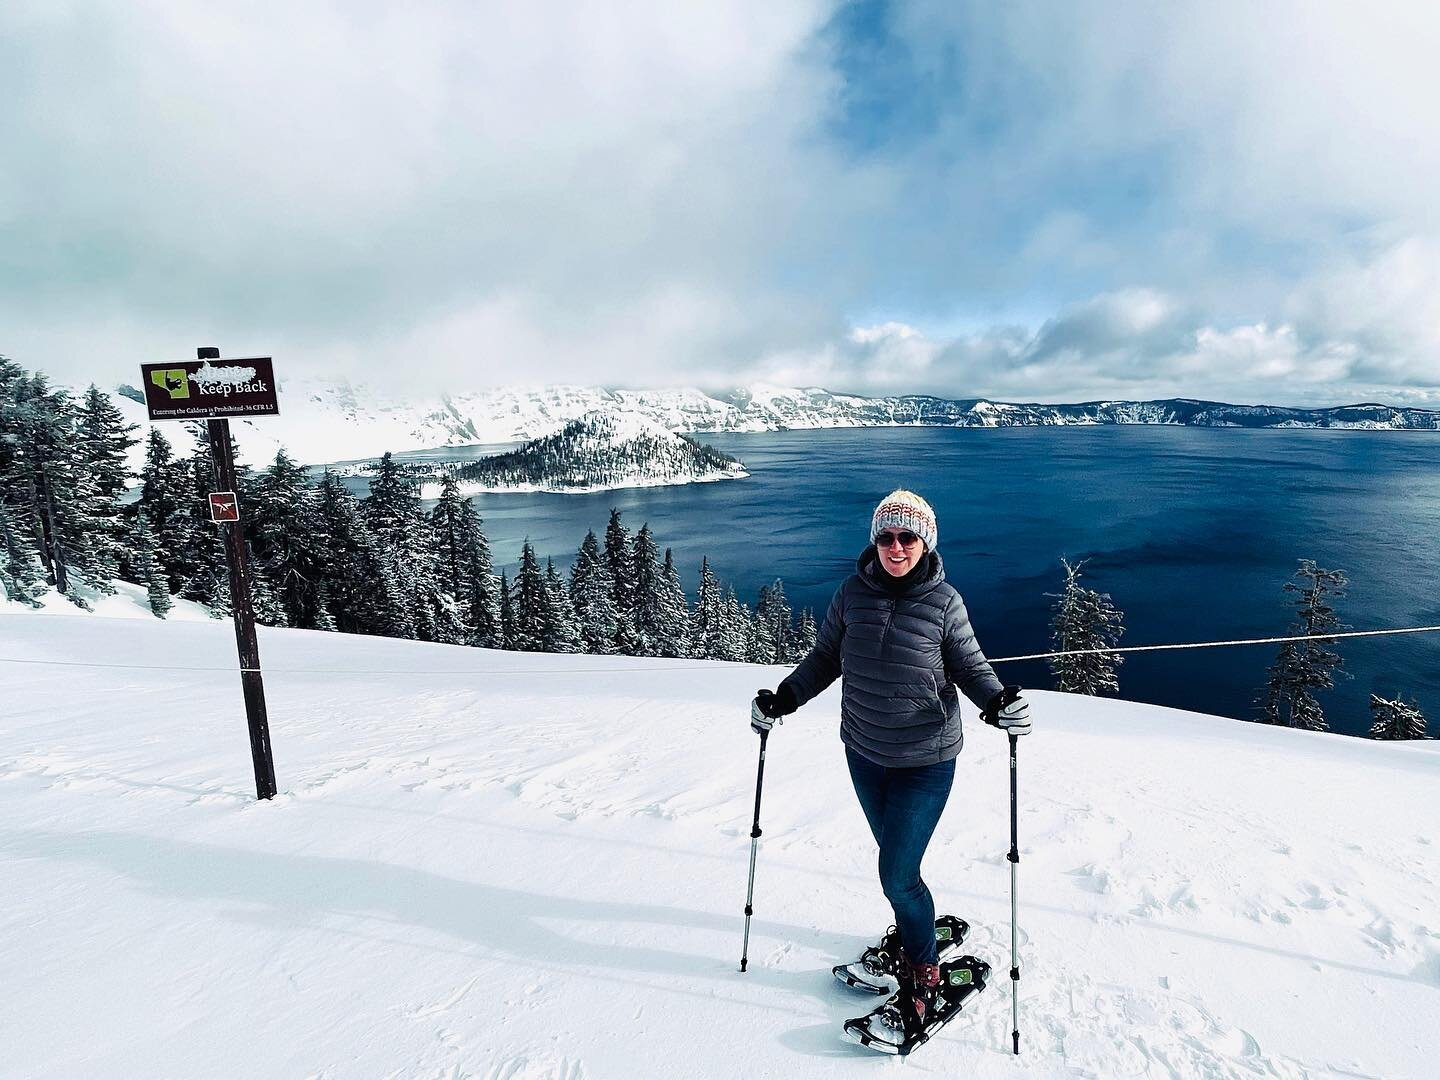 Today was totally epic!  This is ME!  Snowshoeing Crater Lake.  I have so many things on my bucketlist and this is one thing I got to check off! ✅

What are some things on your bucketlist?  Oh, any btw, who wants to get married here?  So cool!!
.
.
.